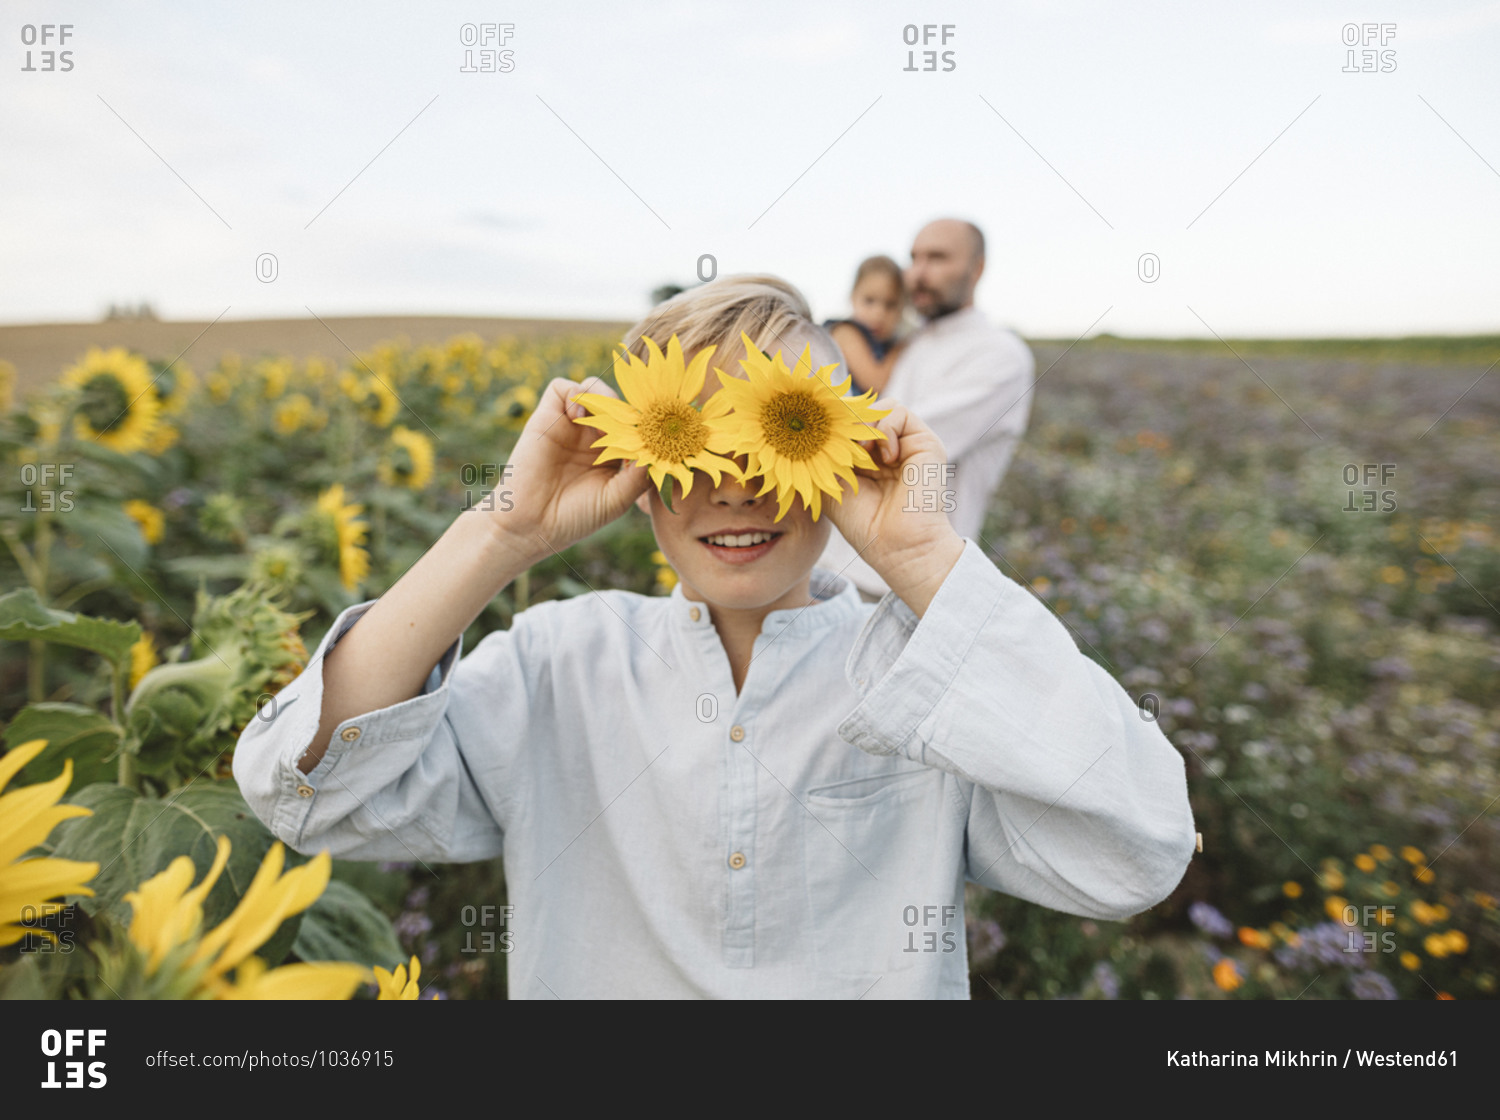 Playful boy covering his eyes with sunflowers in a field with family in background